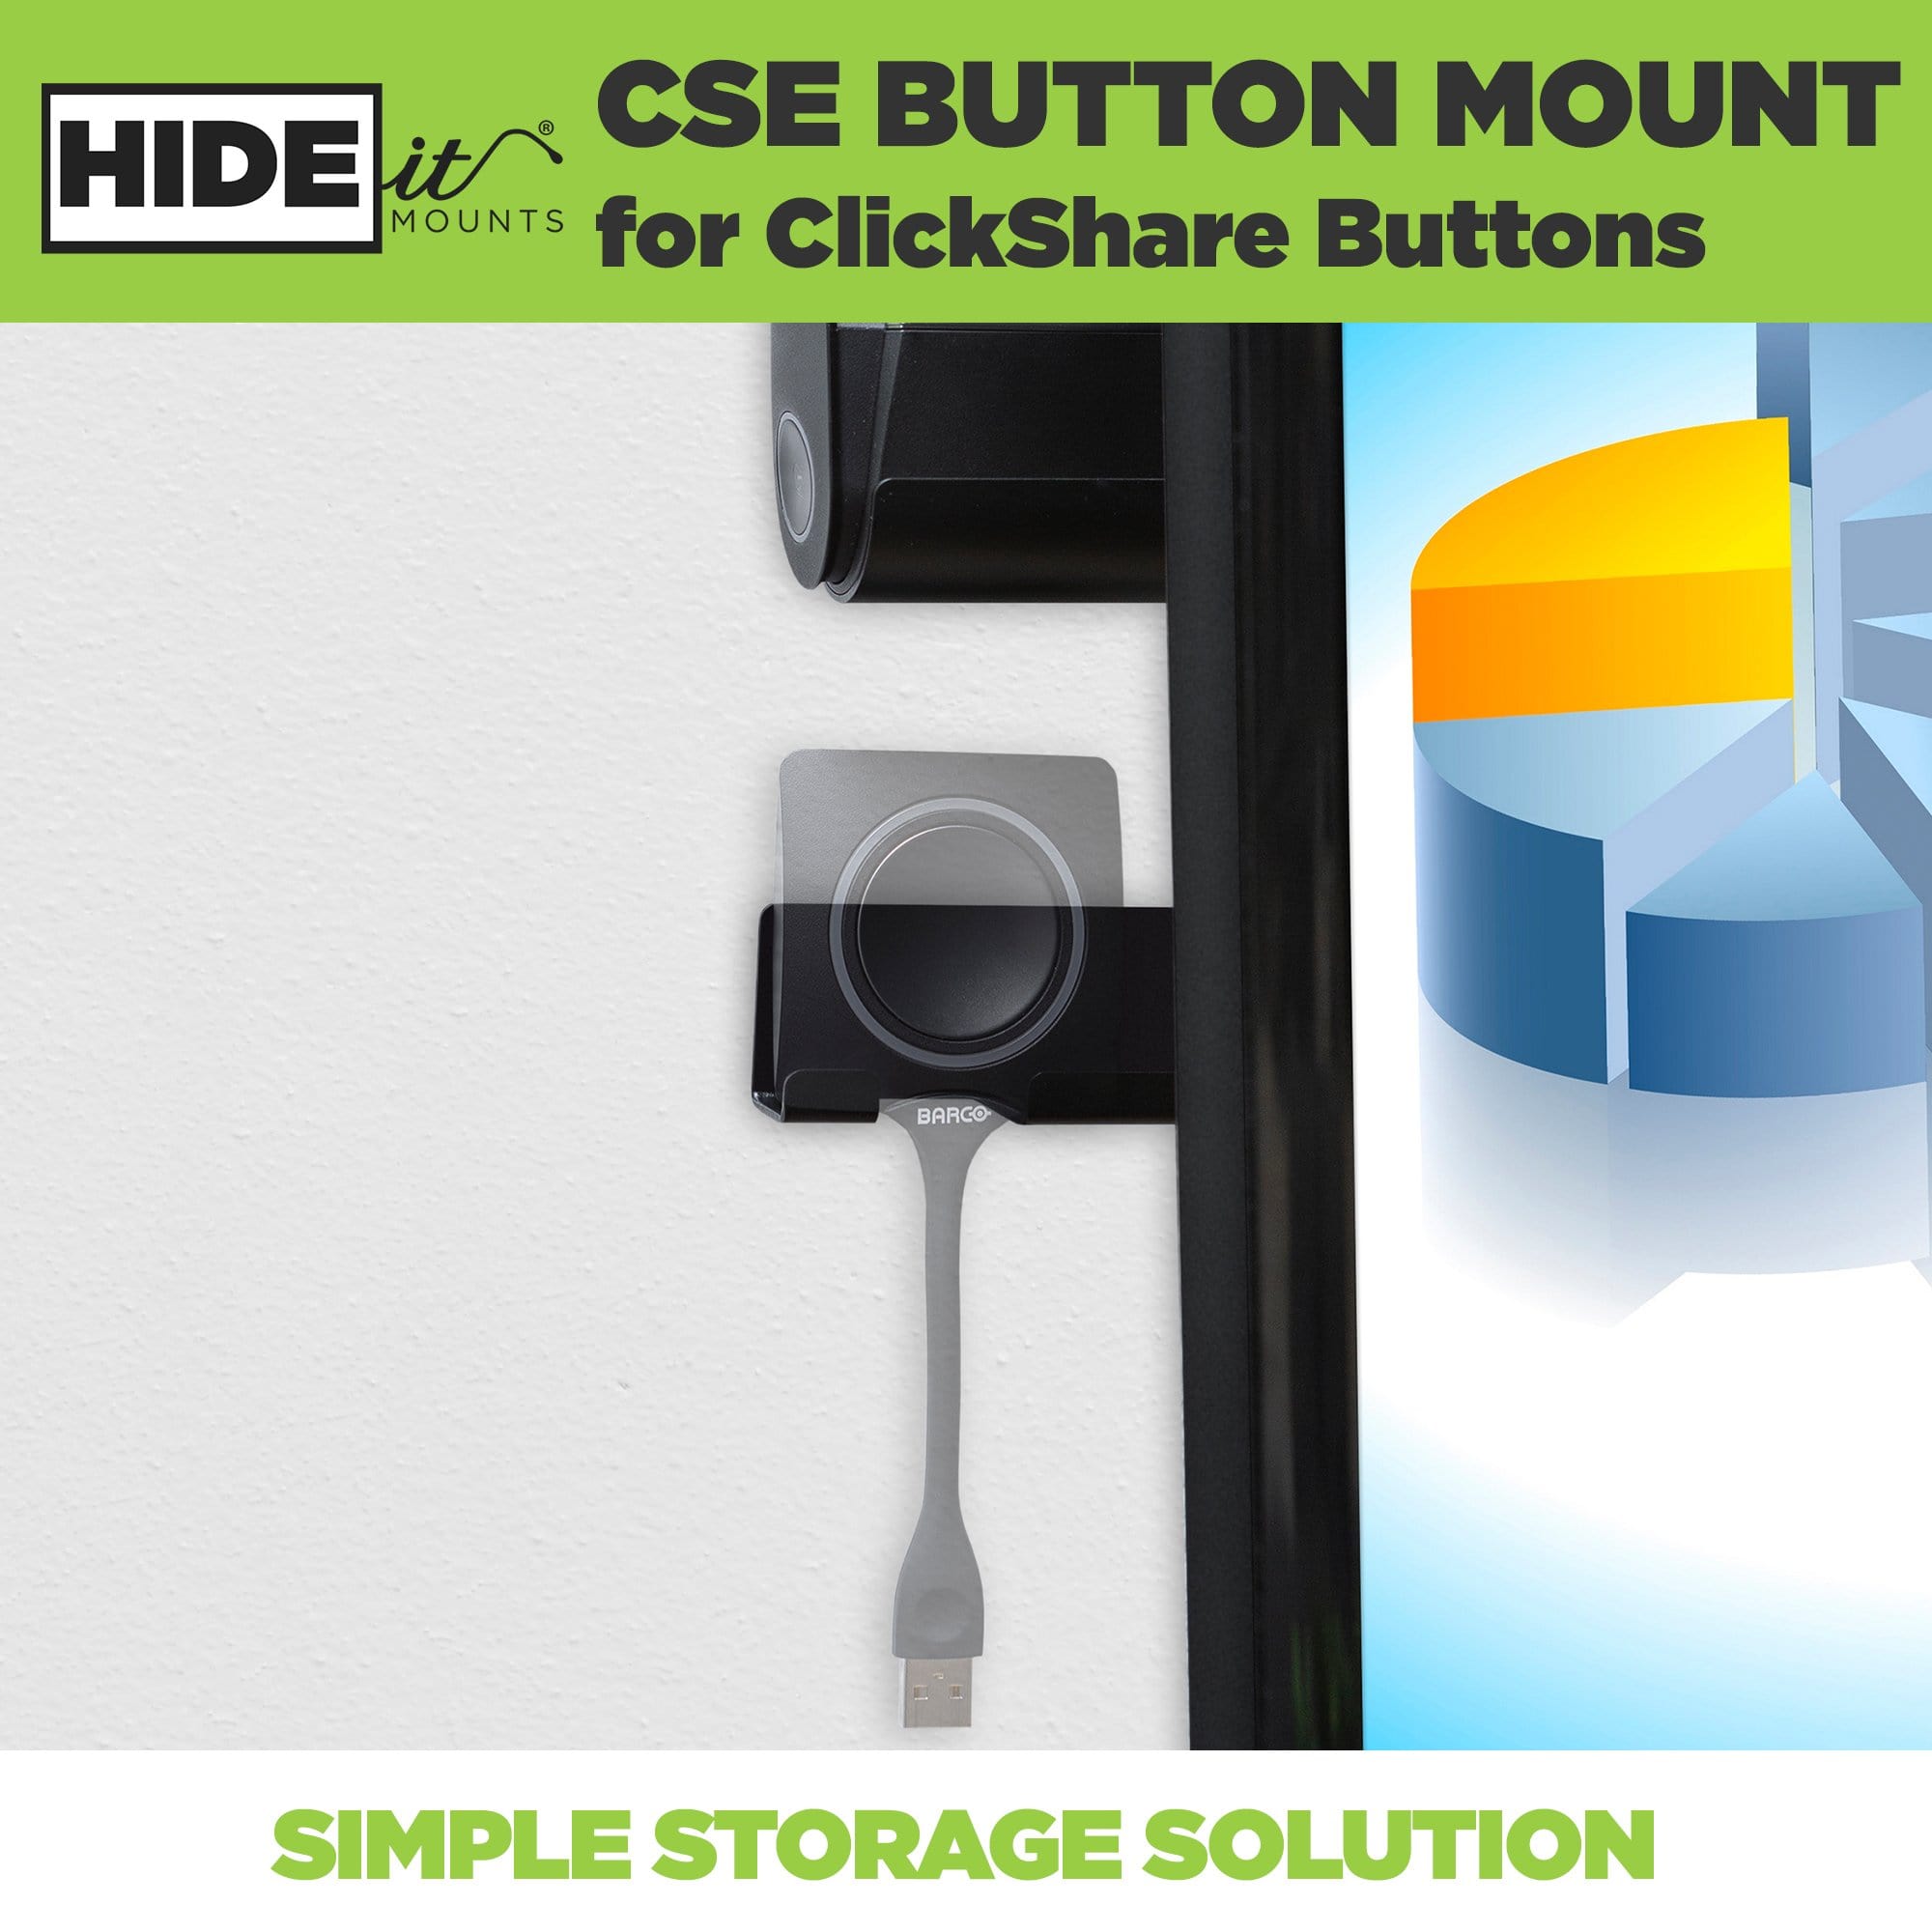 Greyed out ClickShare Dongle securely mounted in HIDEit Mounts steel ClickShare Dongle Holder.